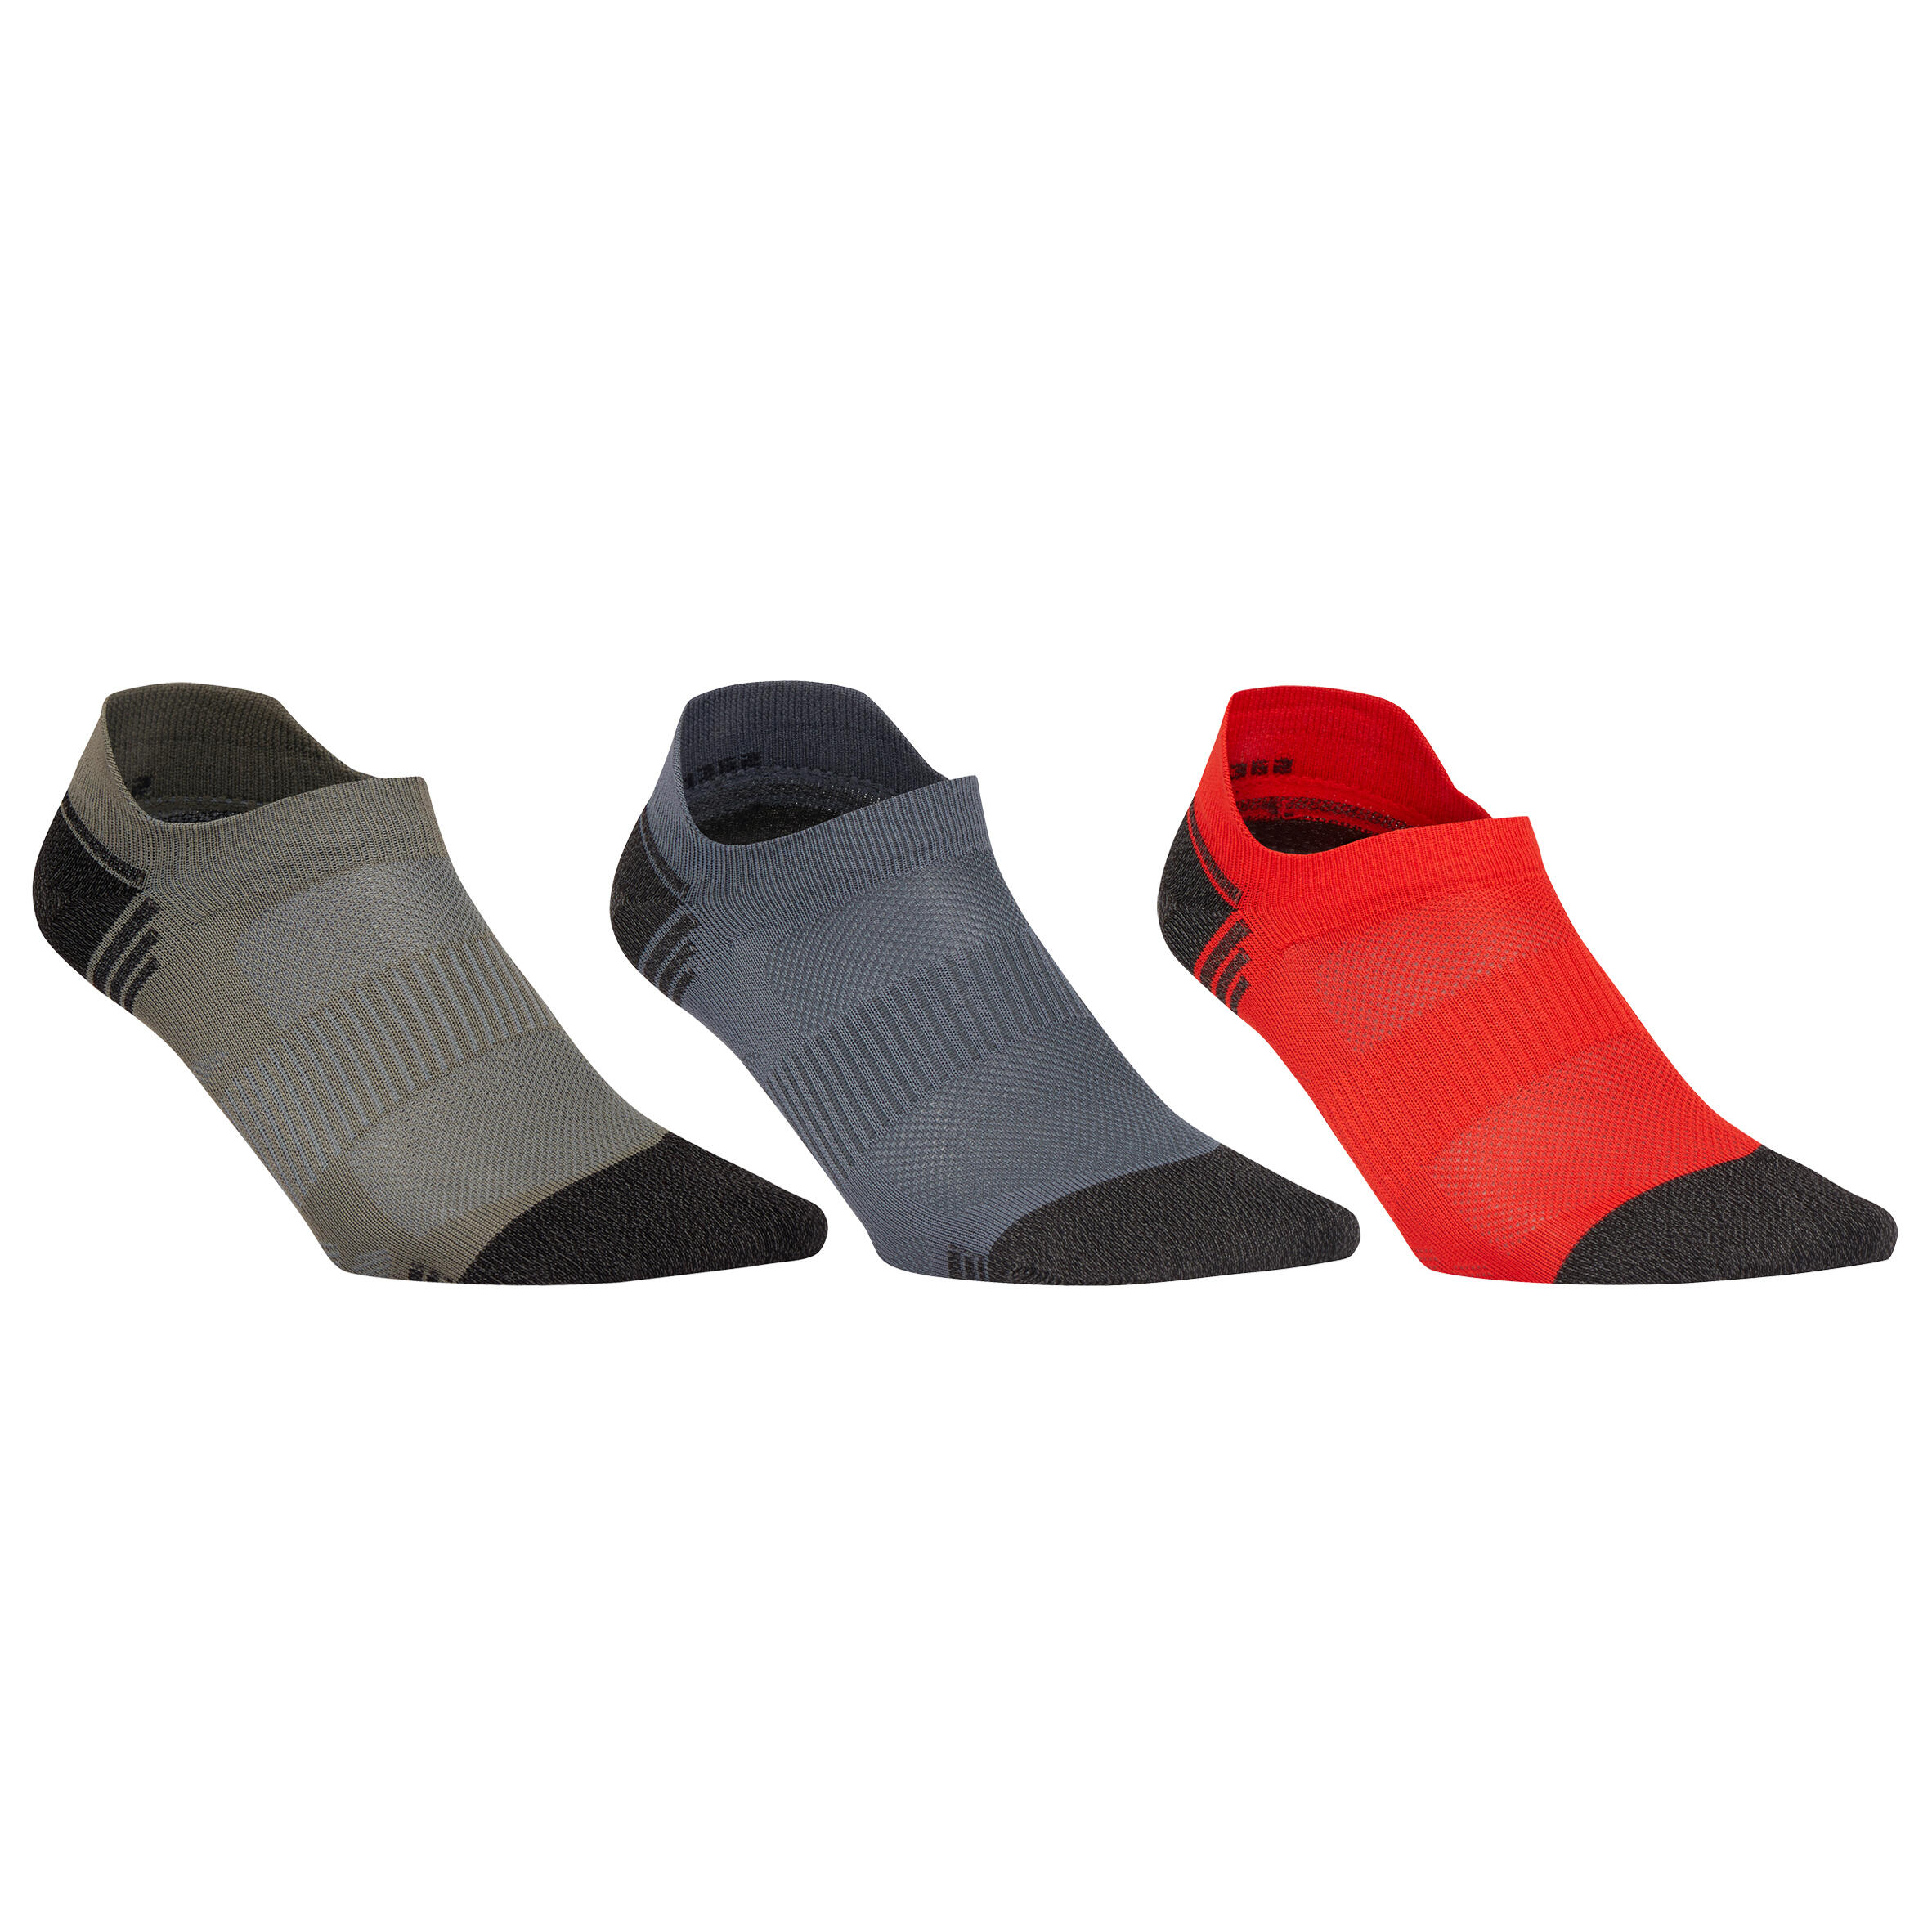 NEWFEEL WS 500 Invisible Fresh Active and Nordic Walking Socks - Red/Grey/Khaki